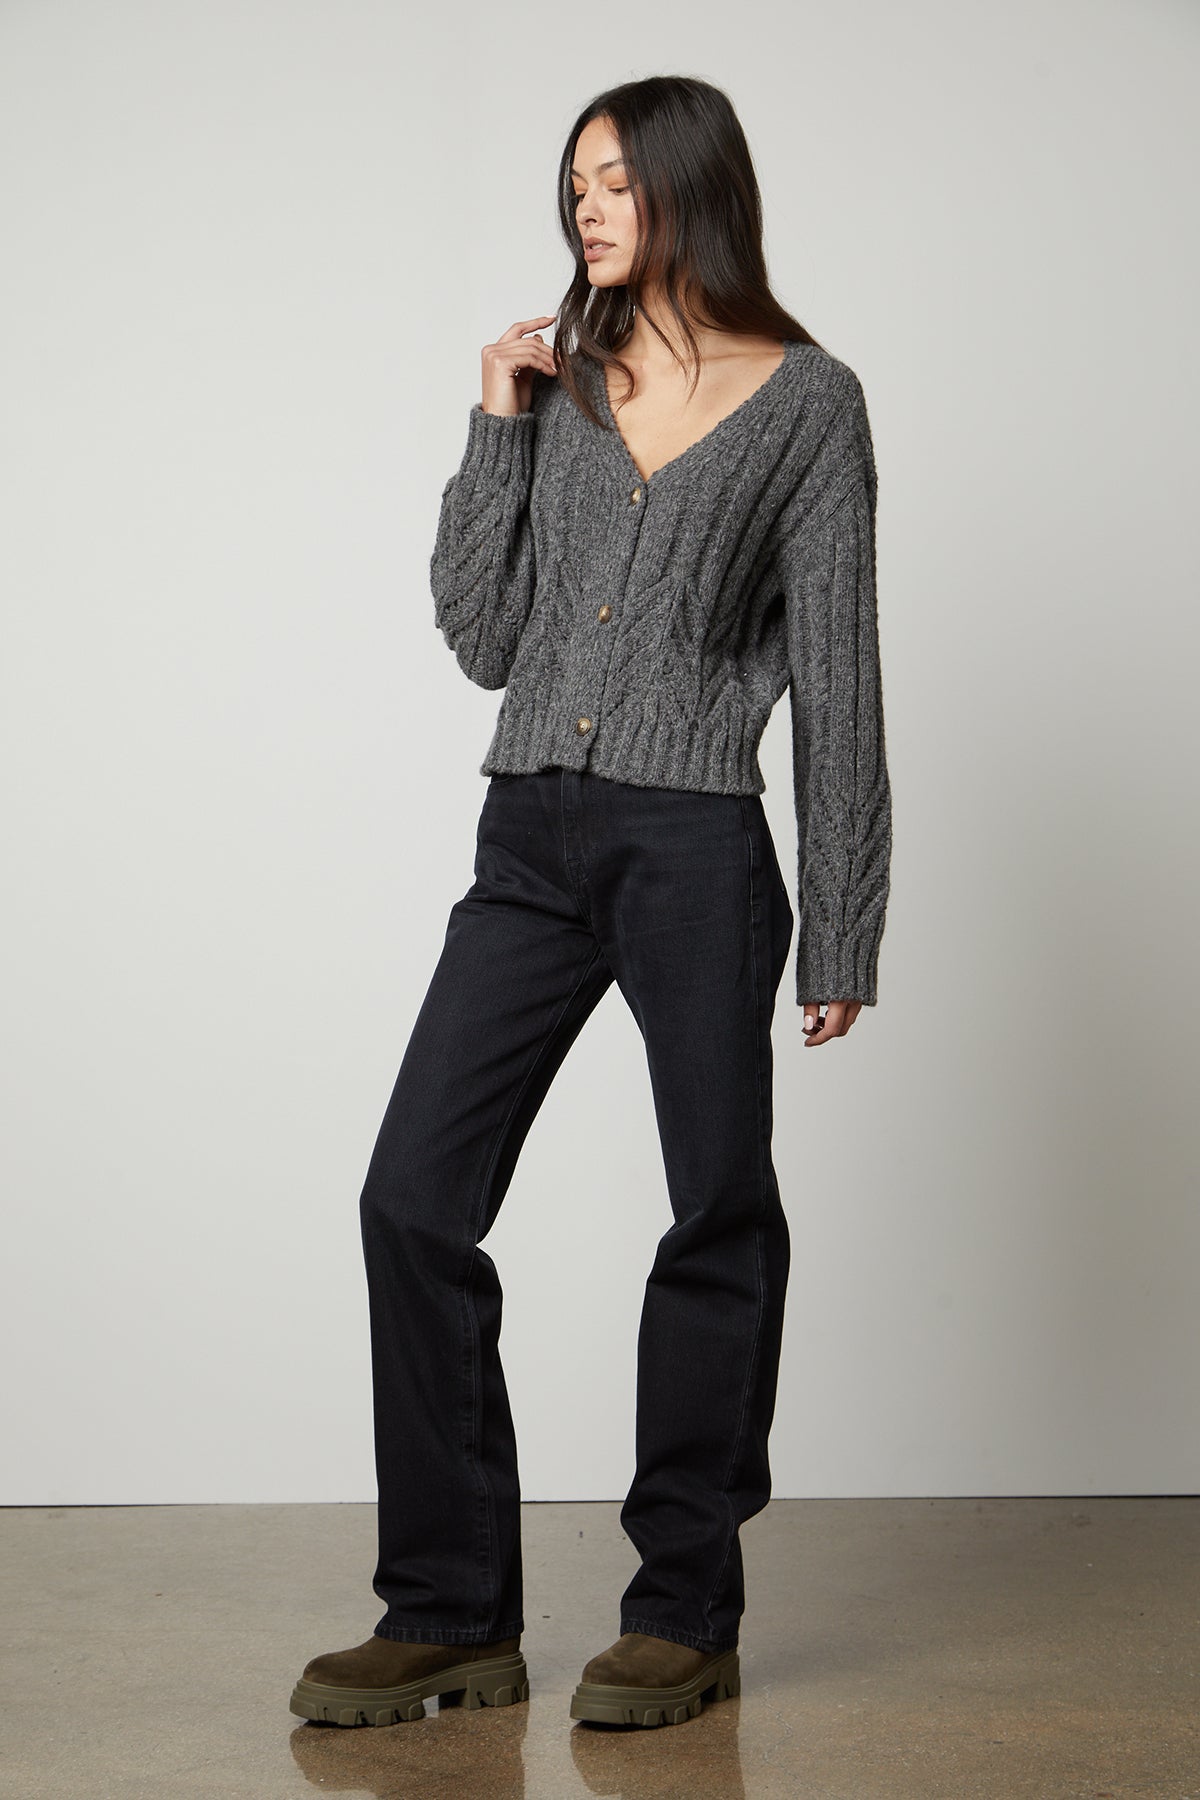 The model is wearing a HAZEL ALPACA cable knit cardigan by Velvet by Graham & Spencer with pointelle detailing and black pants.-35503613182145